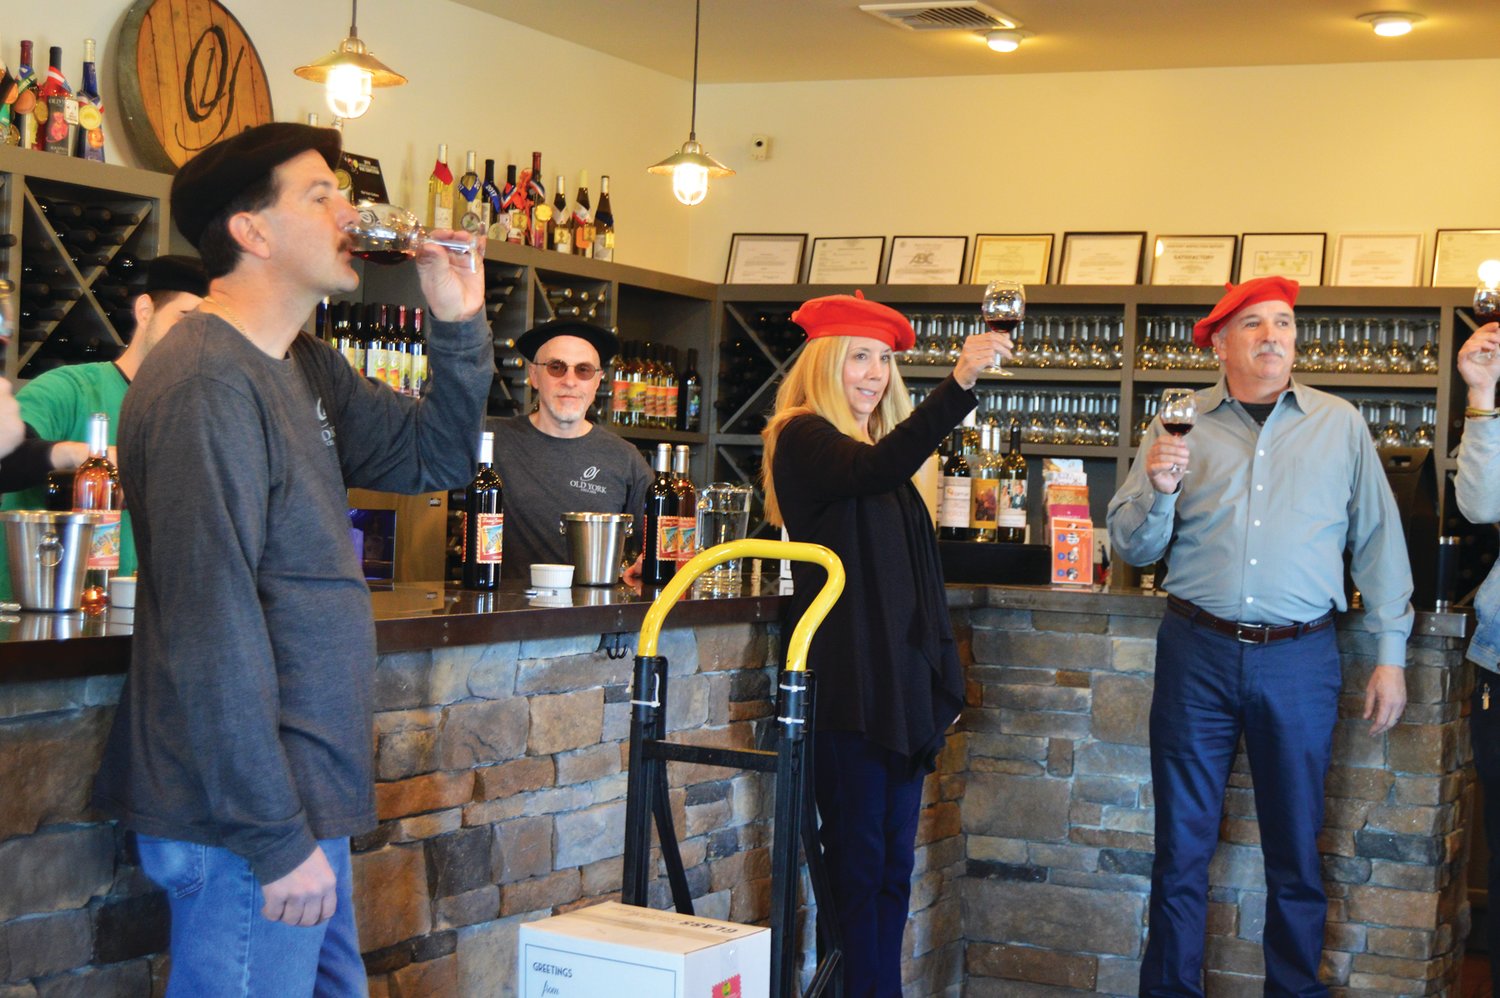 Staff at Old York Cellars in Ringoes, N.J., raise glasses of the vineyard’s first Beajoulais noveau-style wines during wine release festivities. Photograph by Susan S. Yeske